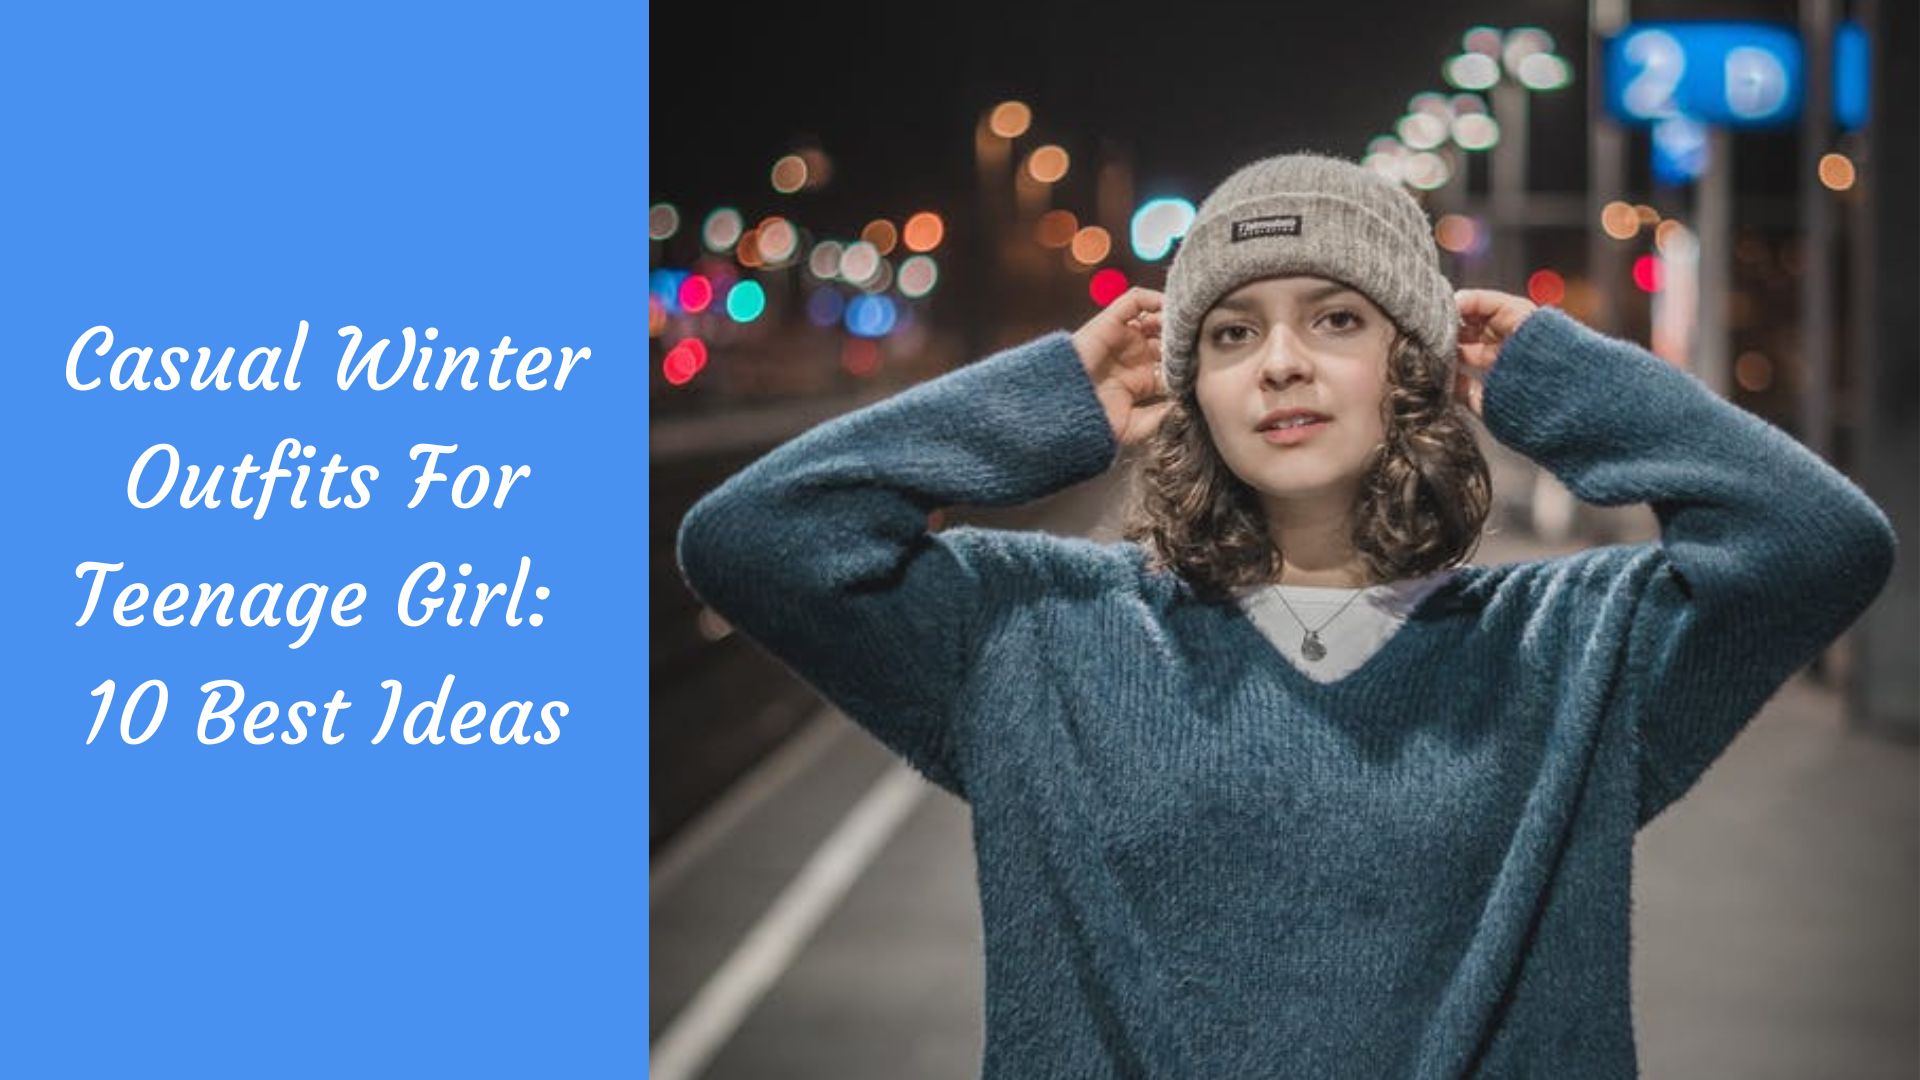 Casual Winter Outfits For Teenage Girl: 10 Best Ideas - The Kosha